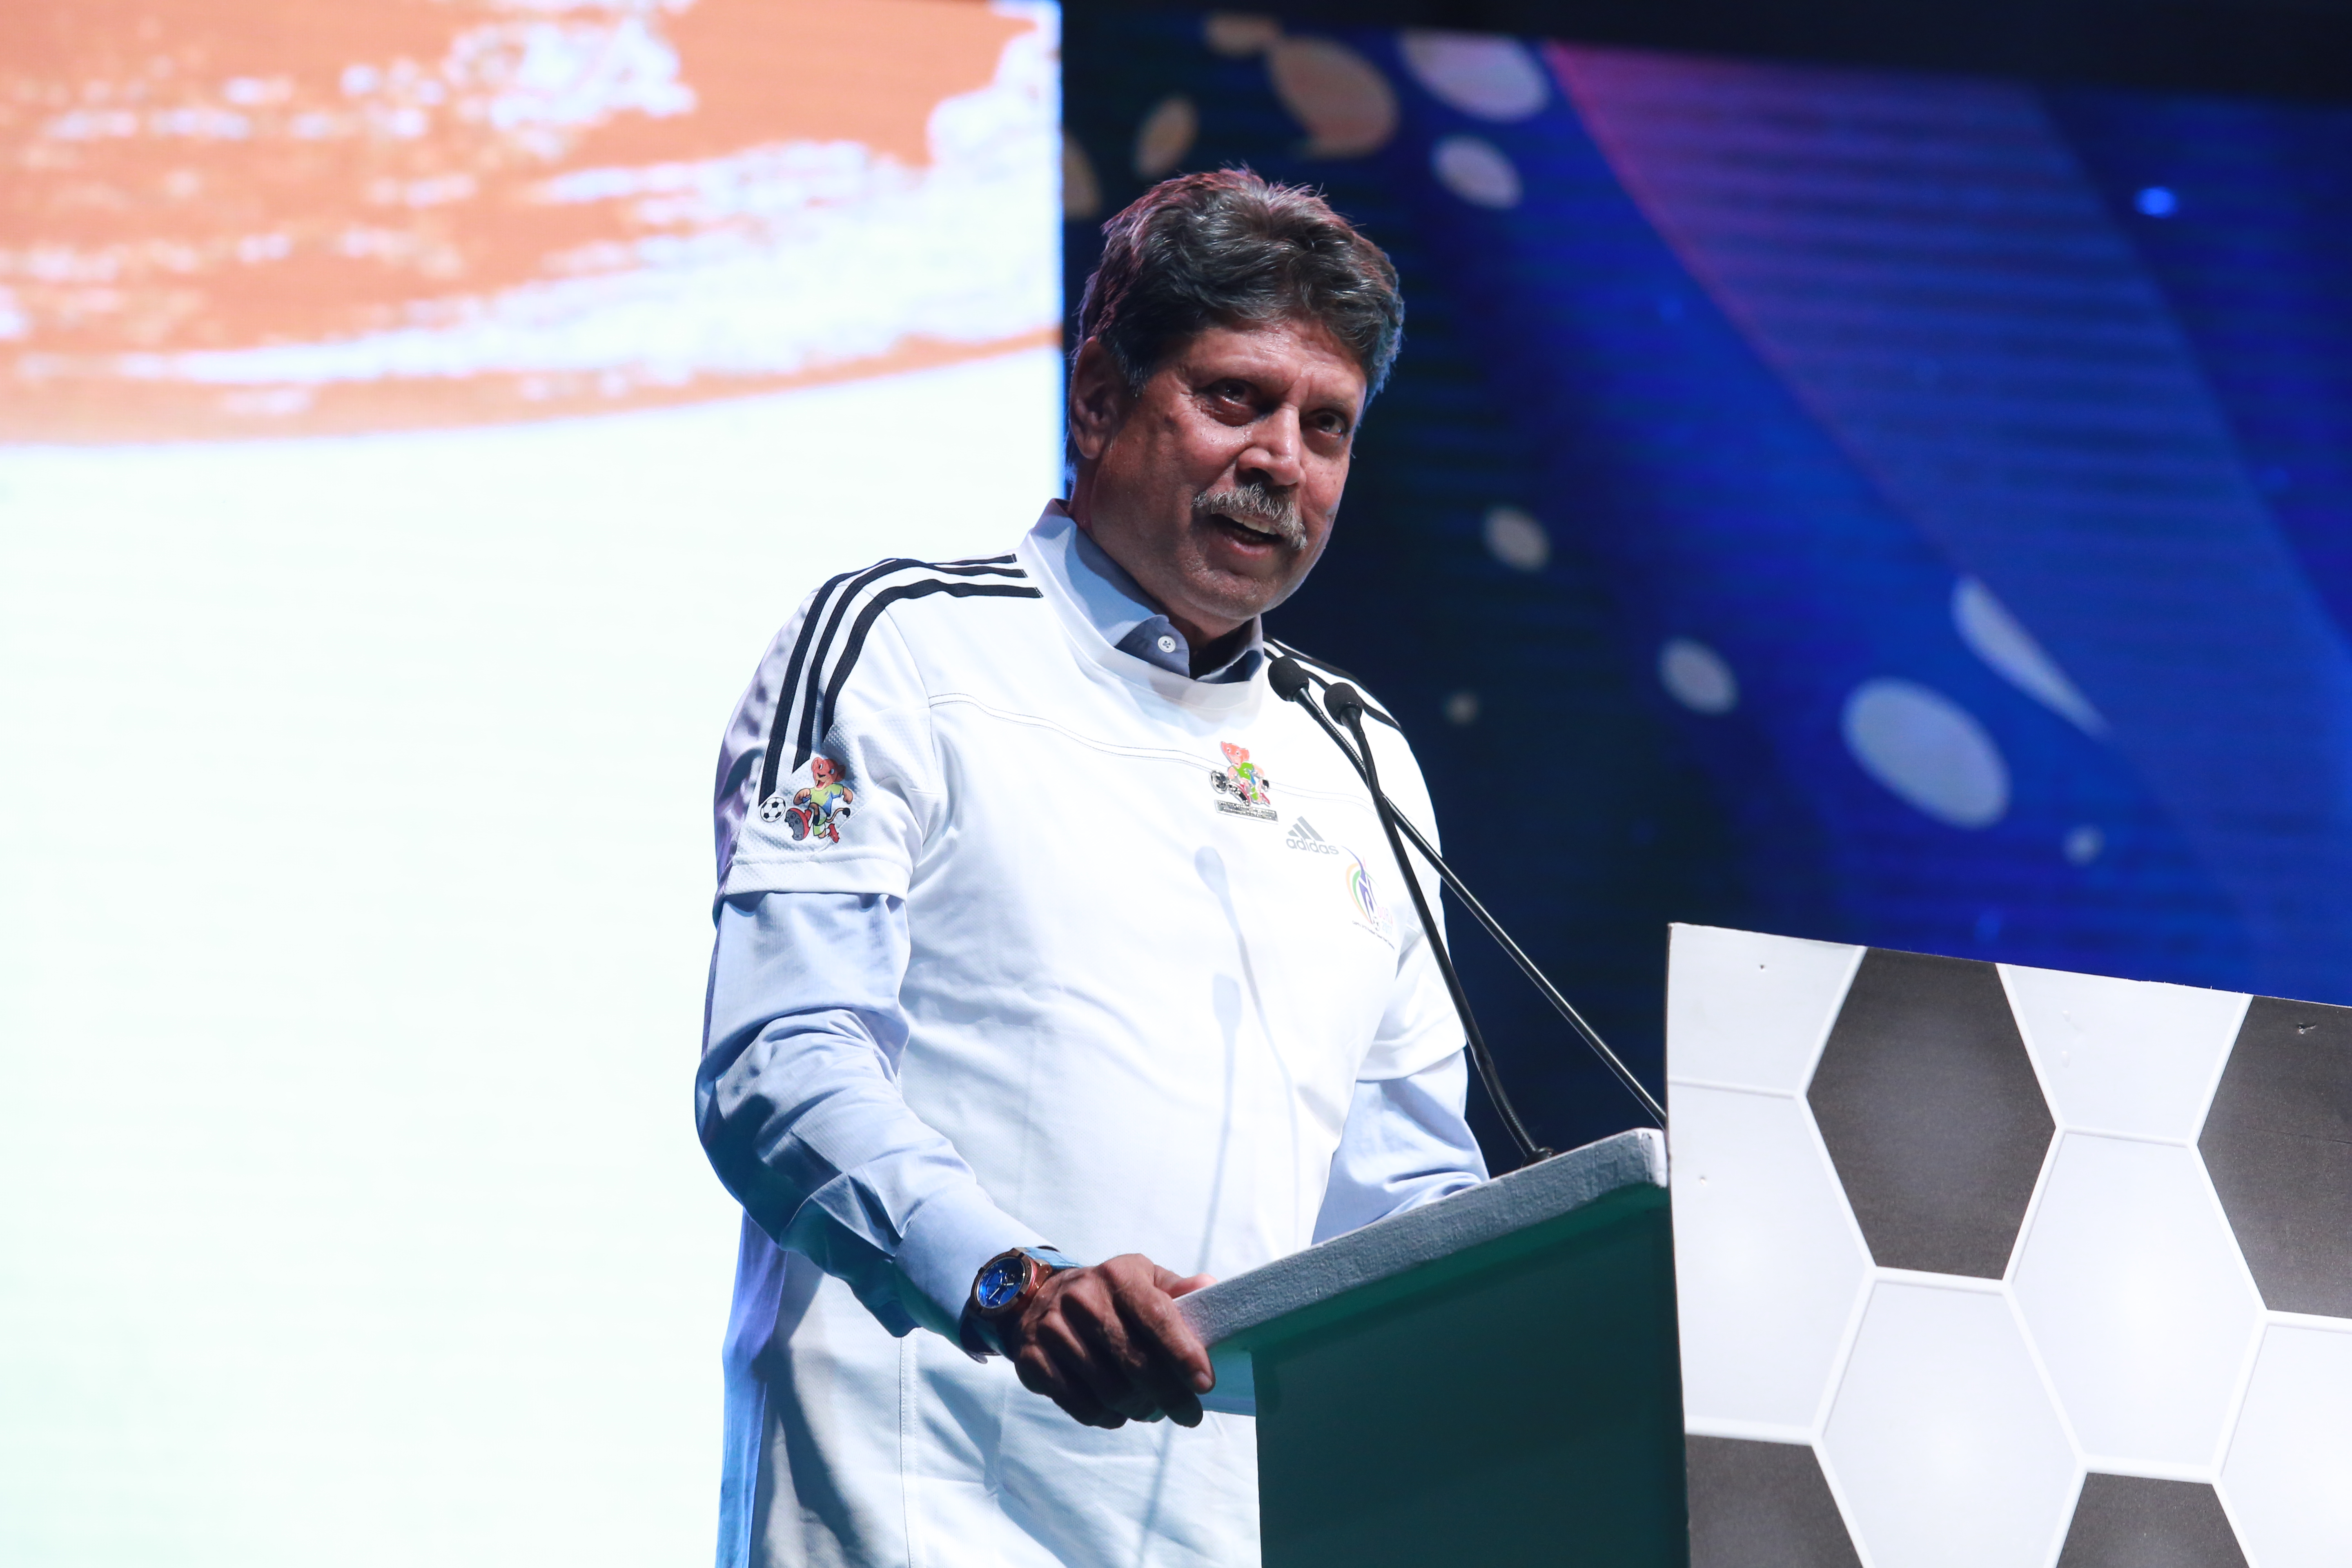 Bouncers are easier to bowl than yorkers or length balls, affirms Kapil Dev